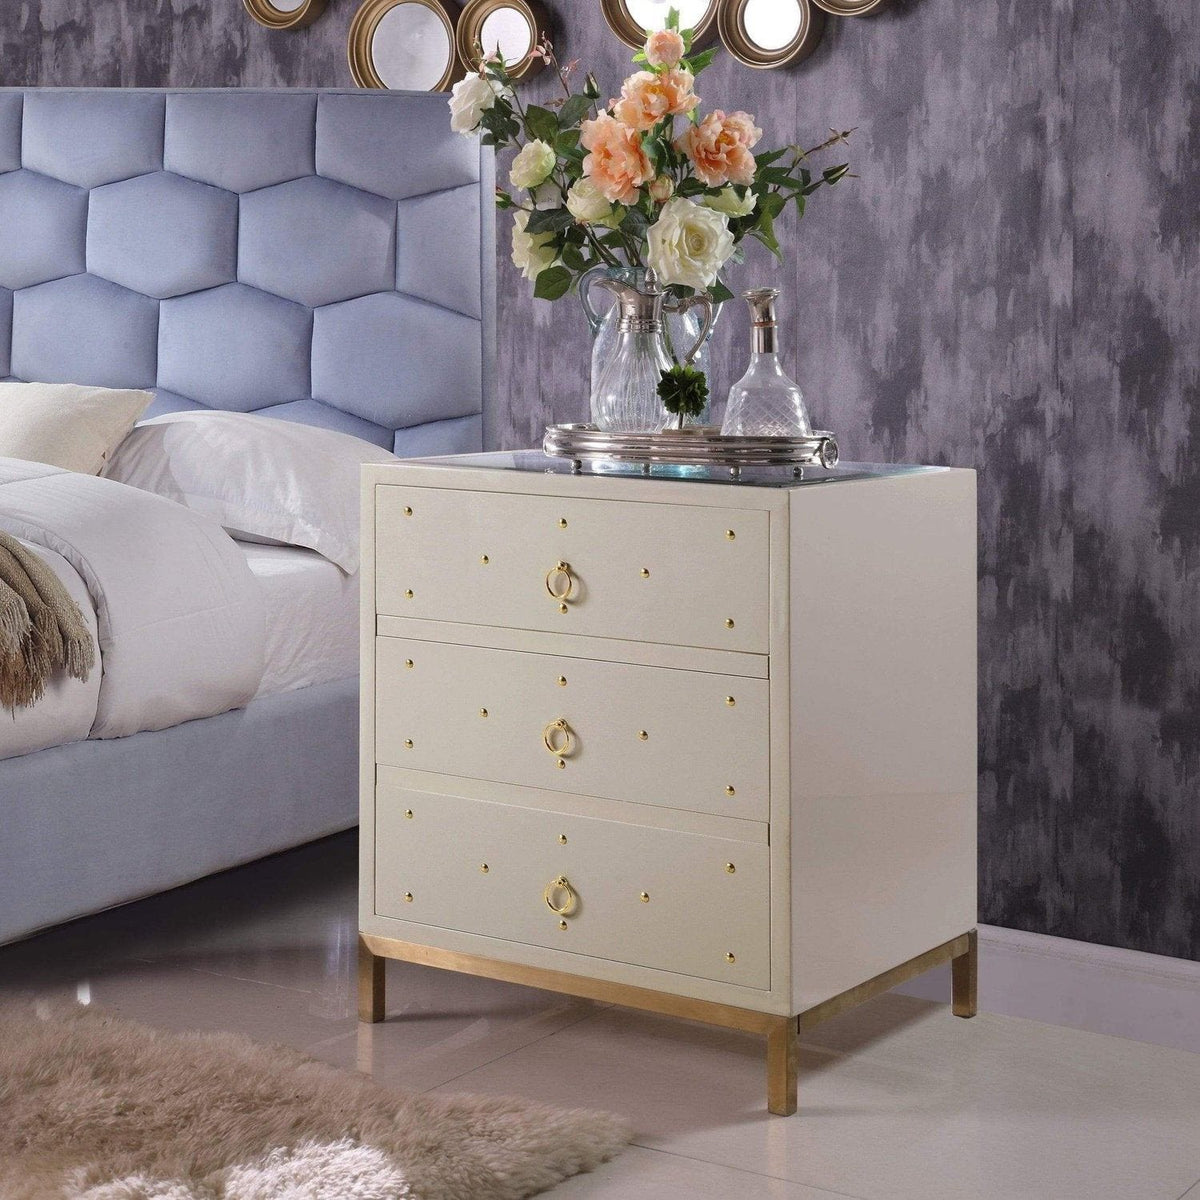 Iconic Home Prato Nightstand | End Side Table Beige